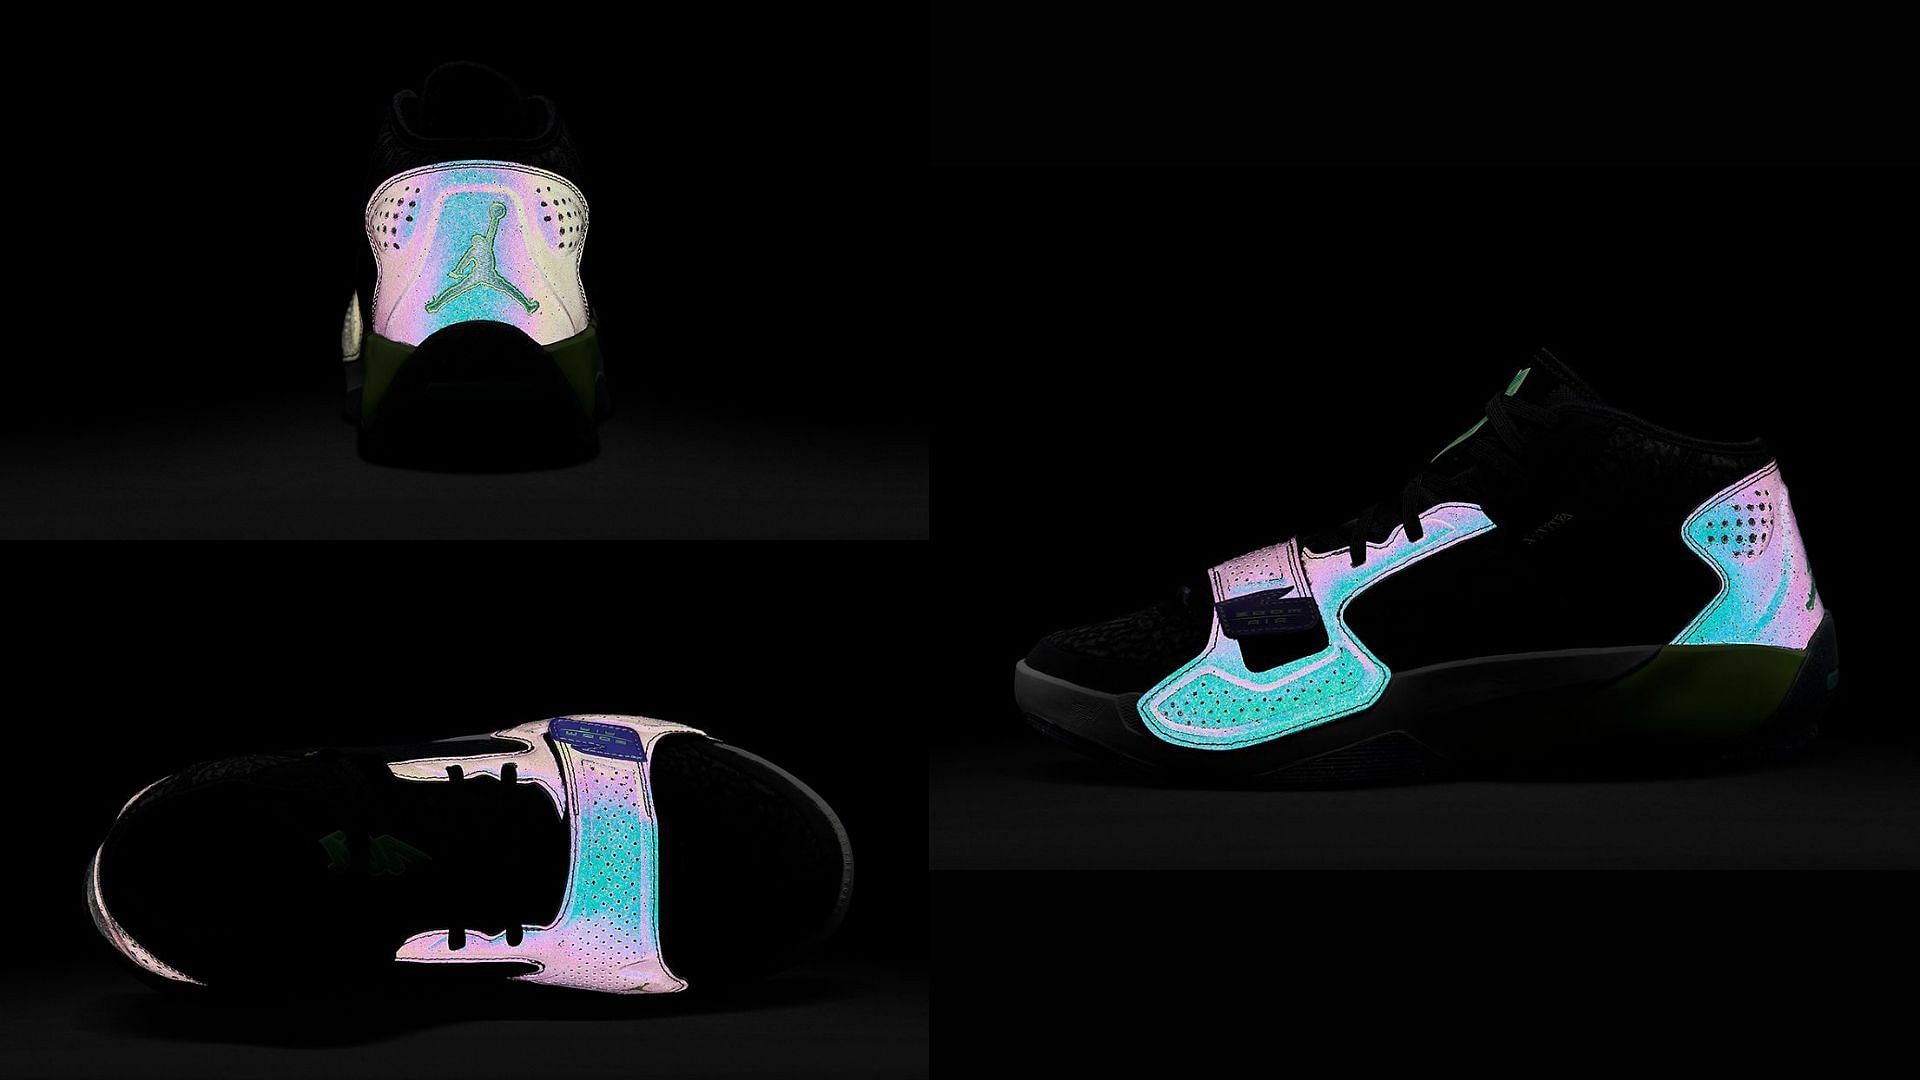 Take a closer look at the holographic embellishments of the shoe (Image via Sportskeeda)